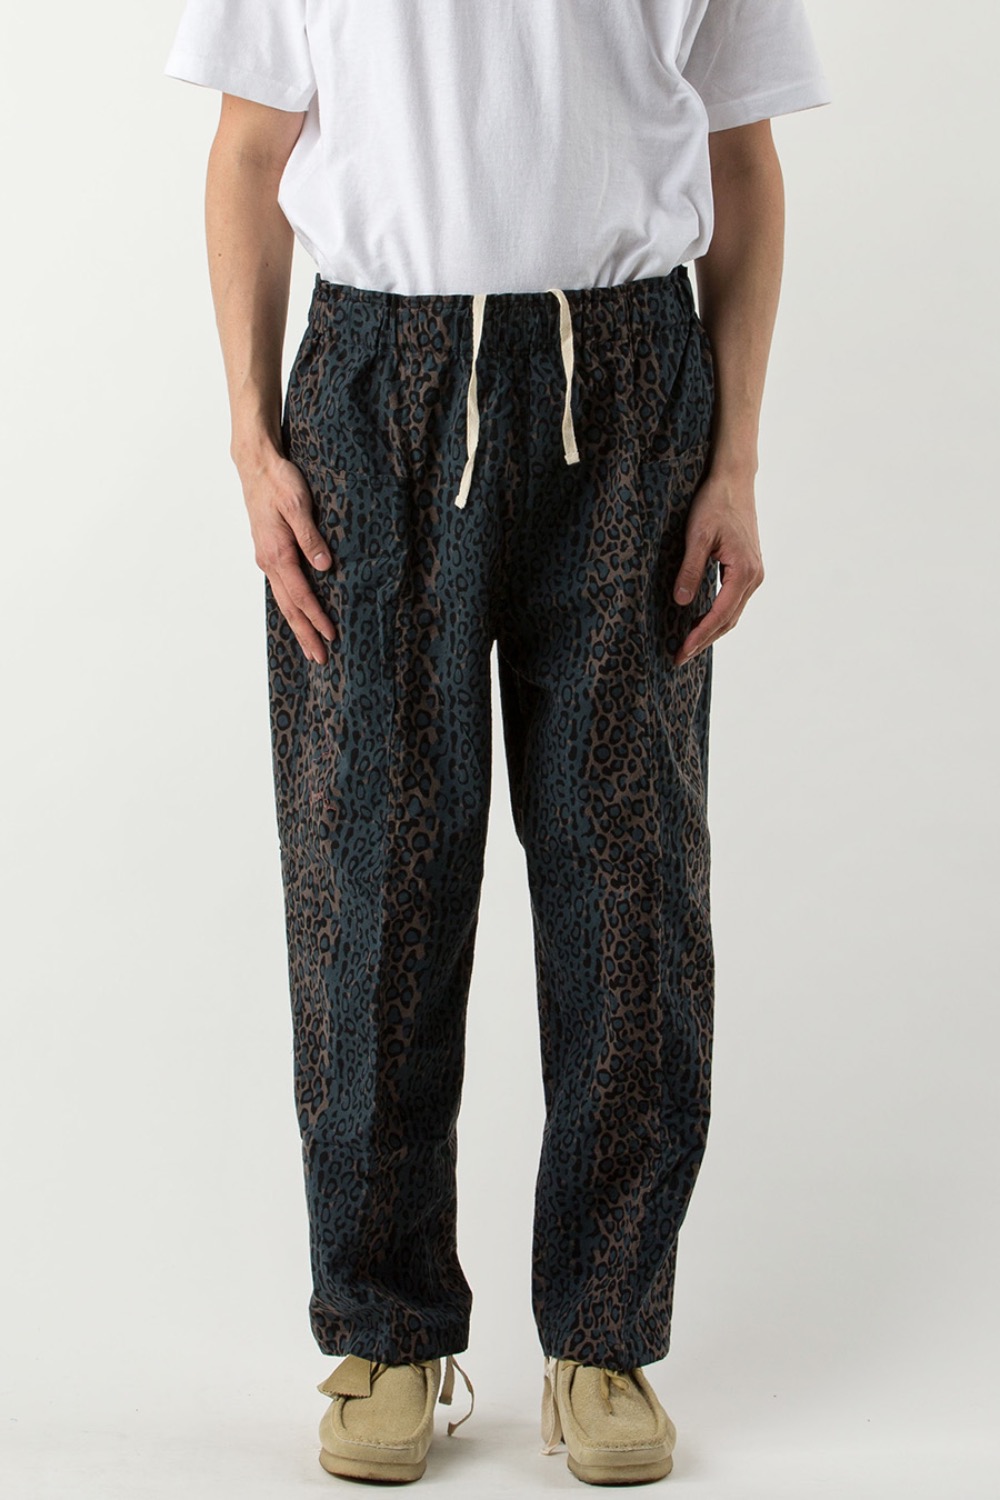 ARMY STRING PANT - FLANNEL PANT LEOPARD